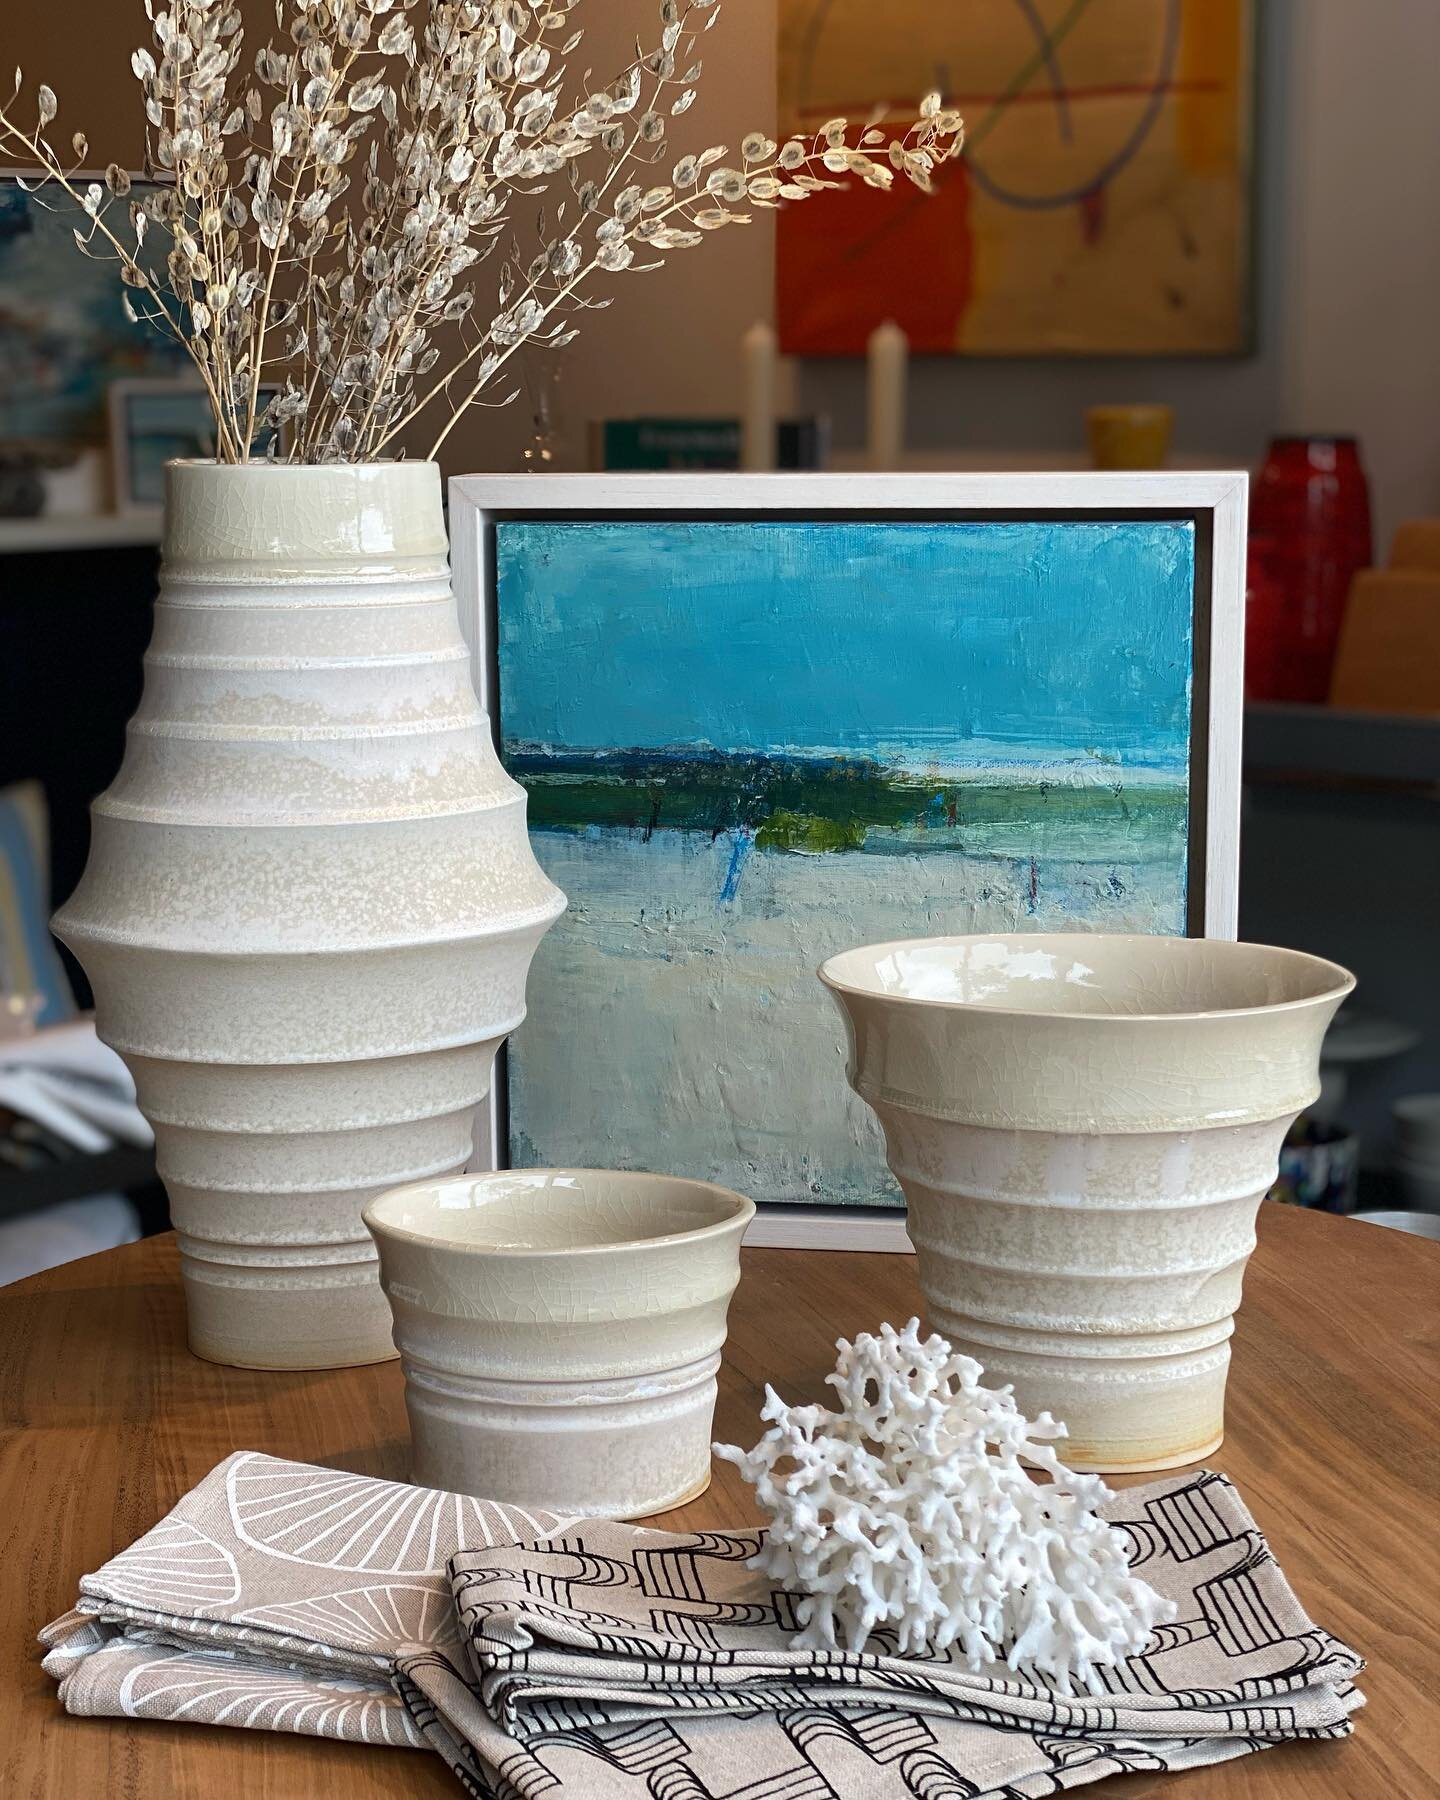 These new pieces from @ruthborgenicht have blown us away! We can see them everywhere from an airy summer home to a cozy office. Our customers seem to agree&mdash;two pieces have already found new homes! 
.
Stop in to see all her new work before it&rs